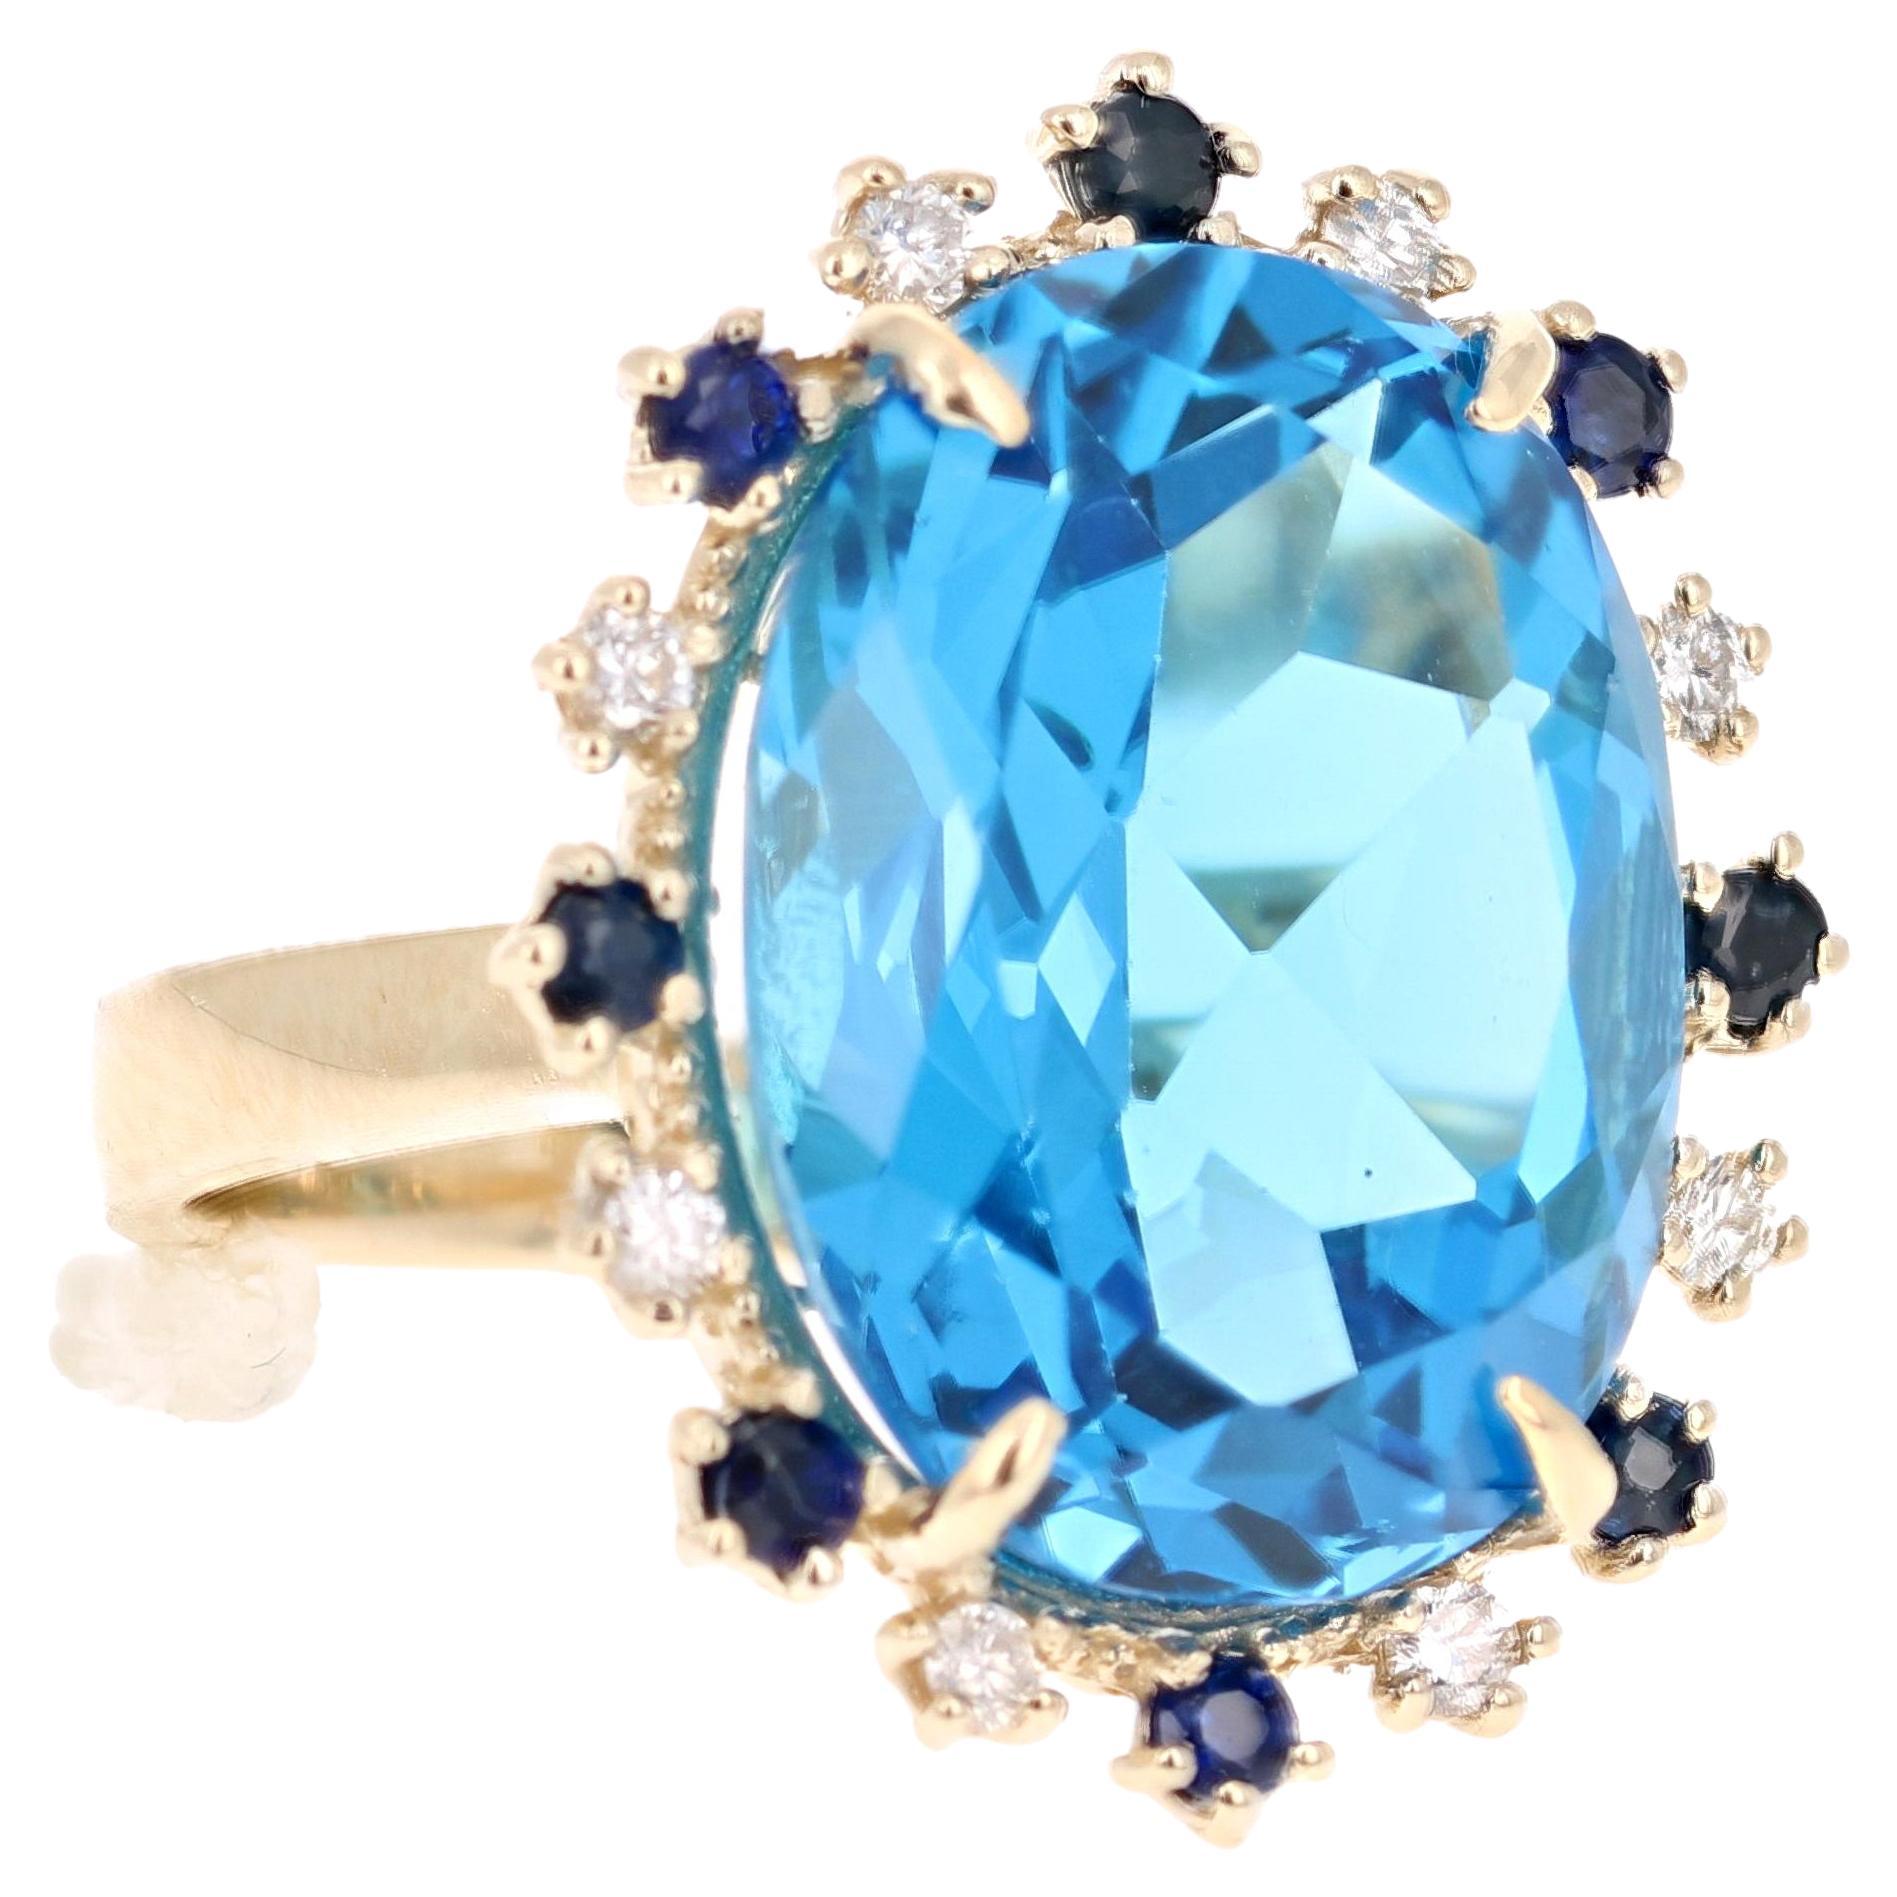 Beautiful to say the Least! This magnificent Oval cut 20.73 Carat Blue Topaz is surrounded by 8 Round Cut Diamonds that weigh 0.25 Carats (Clarity: SI, Color: F) and 8 Blue Sapphires that weigh 0.52 Carats. The total carat weight of the ring is